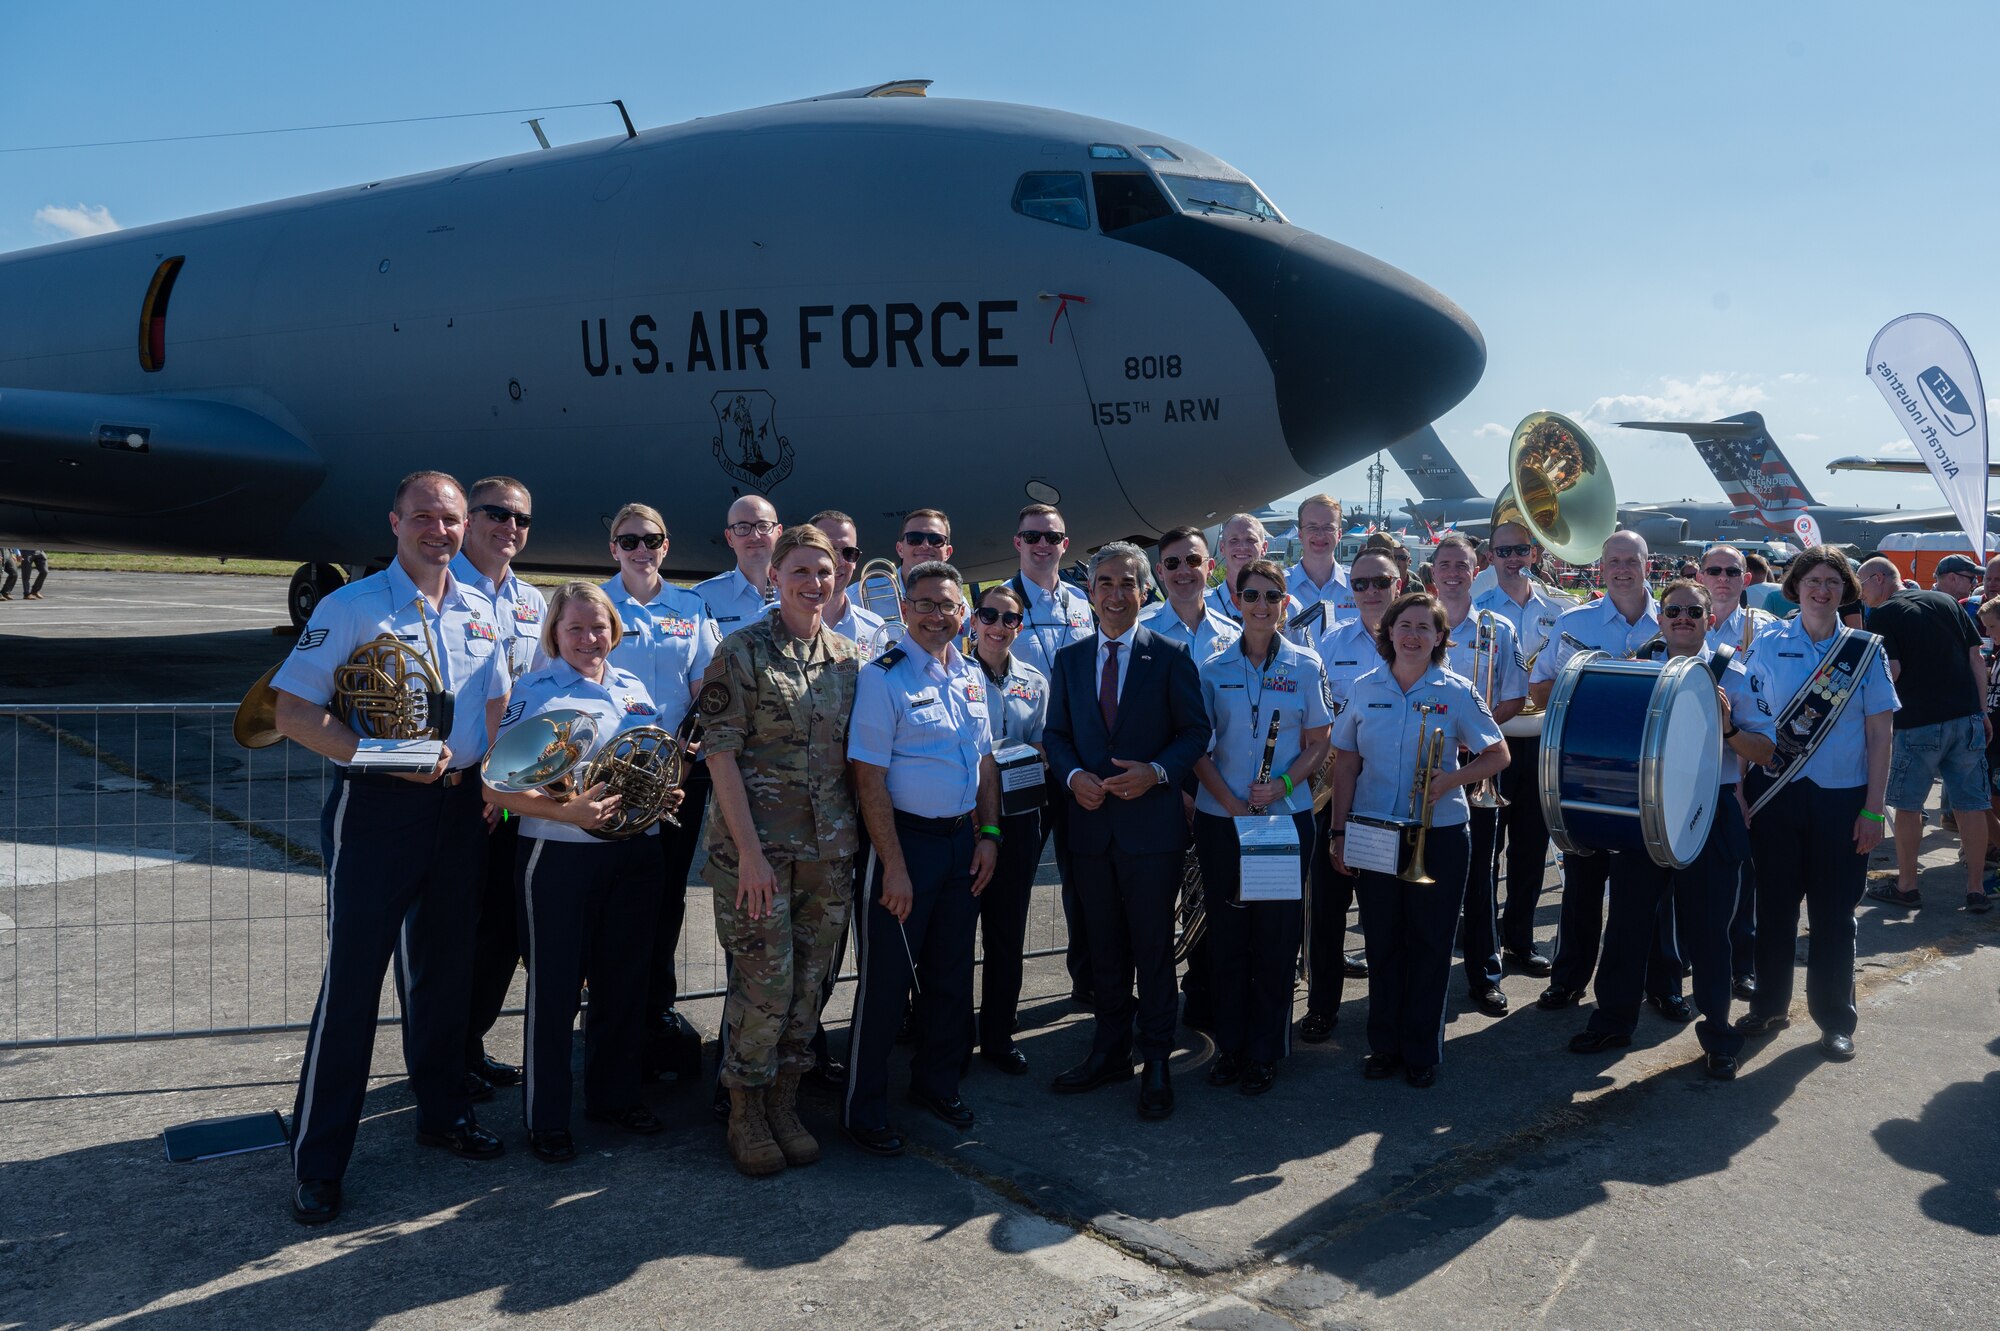 Bijan Sabet, center, U.S. Ambassador to the Czech Republic, and members of the U.S. Air Forces in Europe Ceremonial Band, stand together in front of a KC-135 Stratotanker aircraft from the 155th Air Refueling Wing, Lincoln, Nebraska, during the NATO Days event at Leoš Janáček Airport in Ostrava, Czech Republic, Sept. 16, 2023.